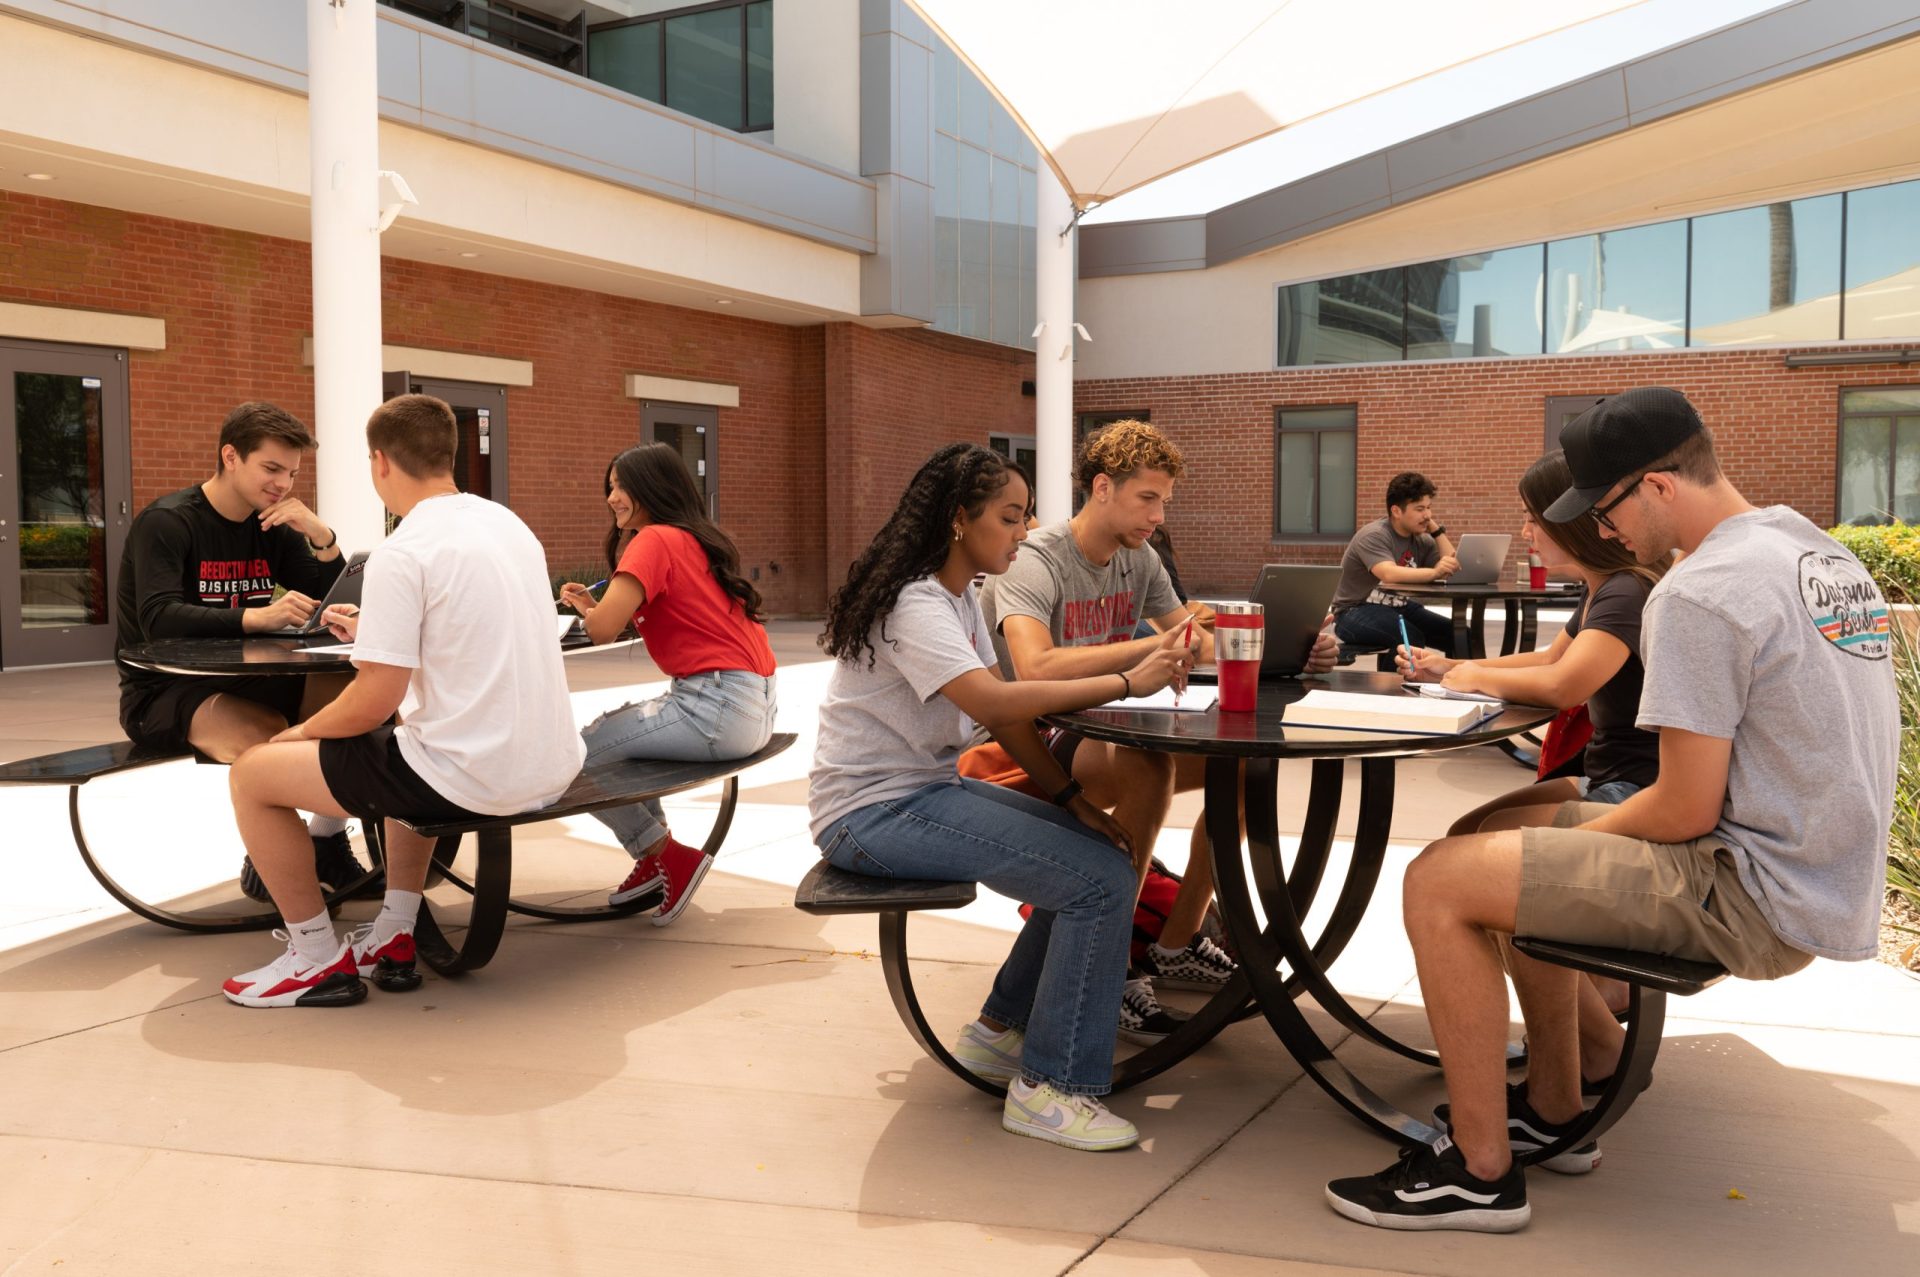 Mesa, students studying on campus, study group